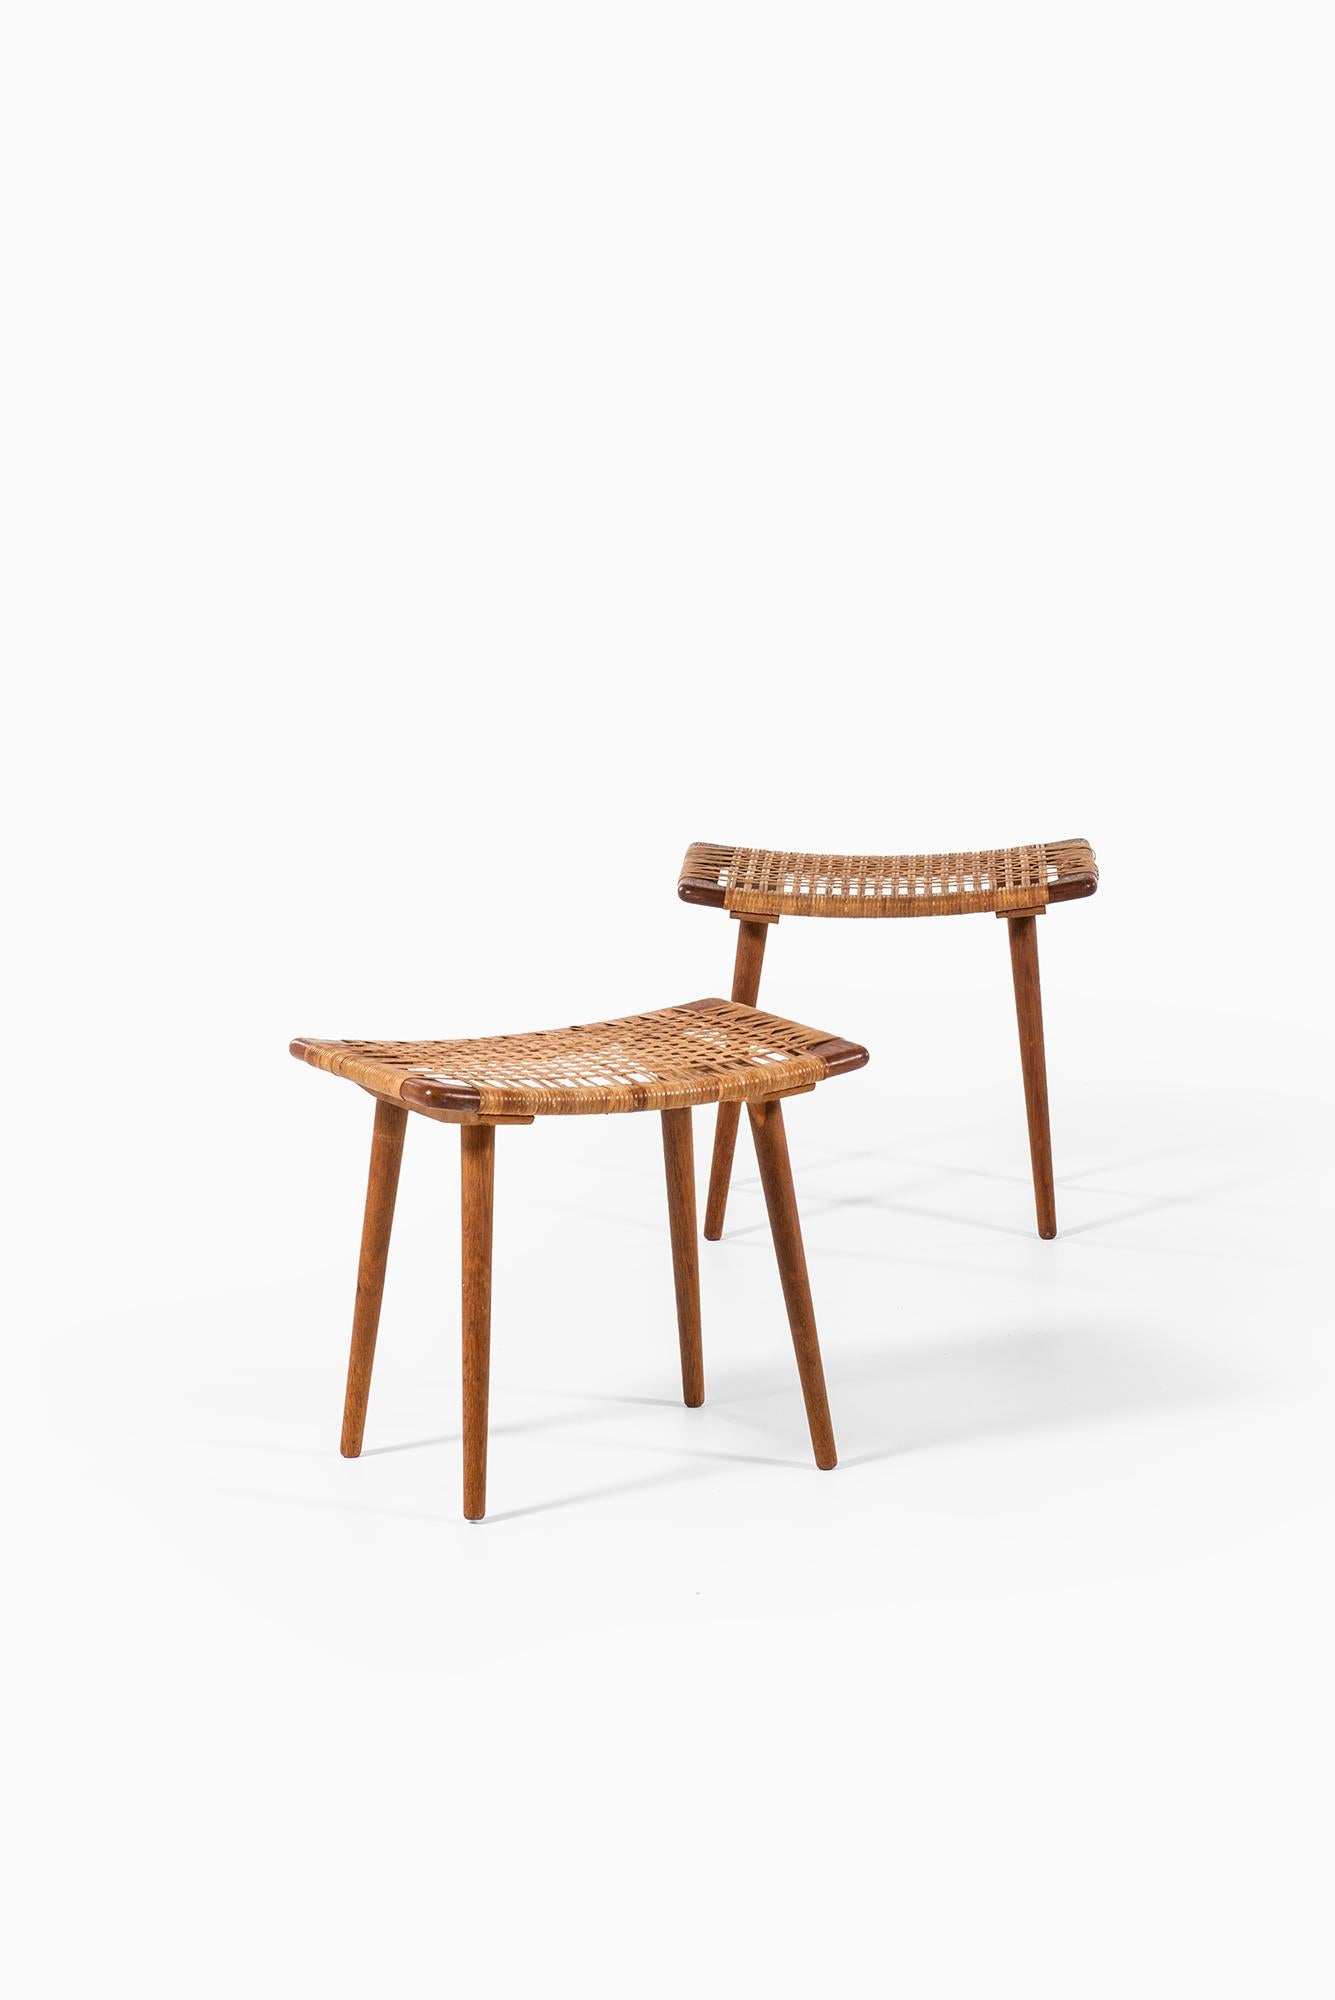 Scandinavian Modern Pair of Stools in Oak and Woven Cane Produced in Denmark